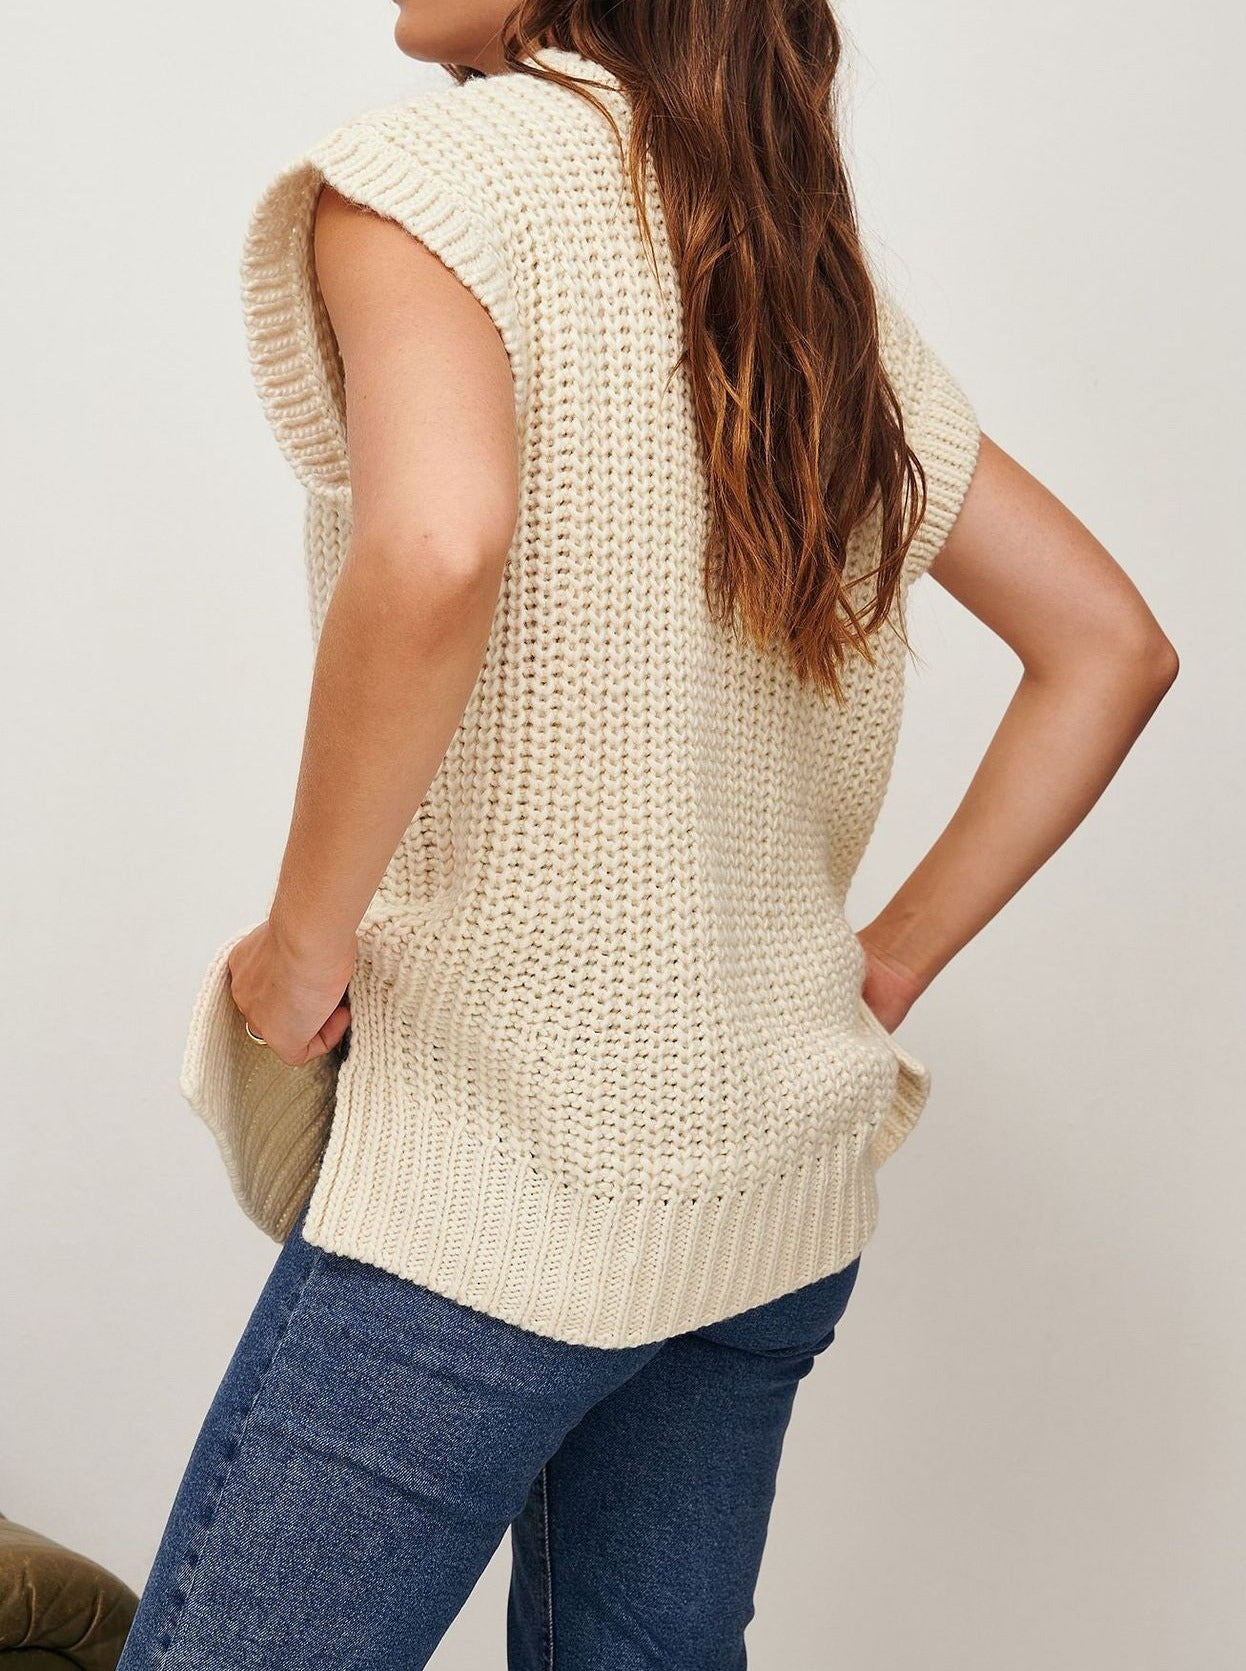 NTG Fad Clothing New Loose Round Neck Sleeveless Vest Knitted Sweater